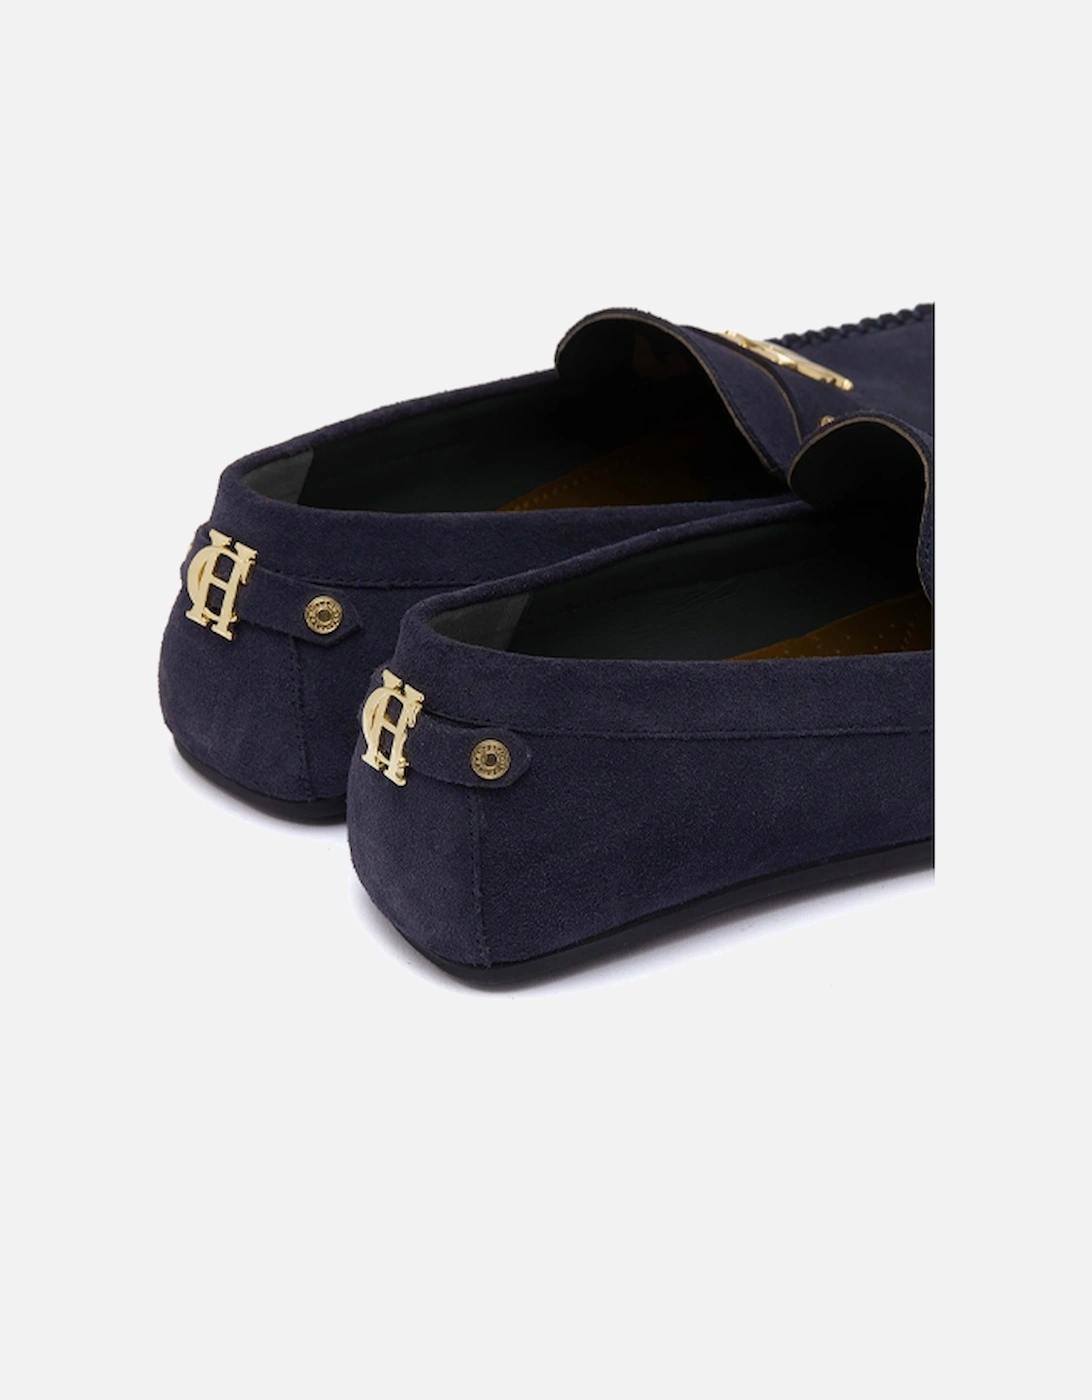 The Driving Loafer Navy